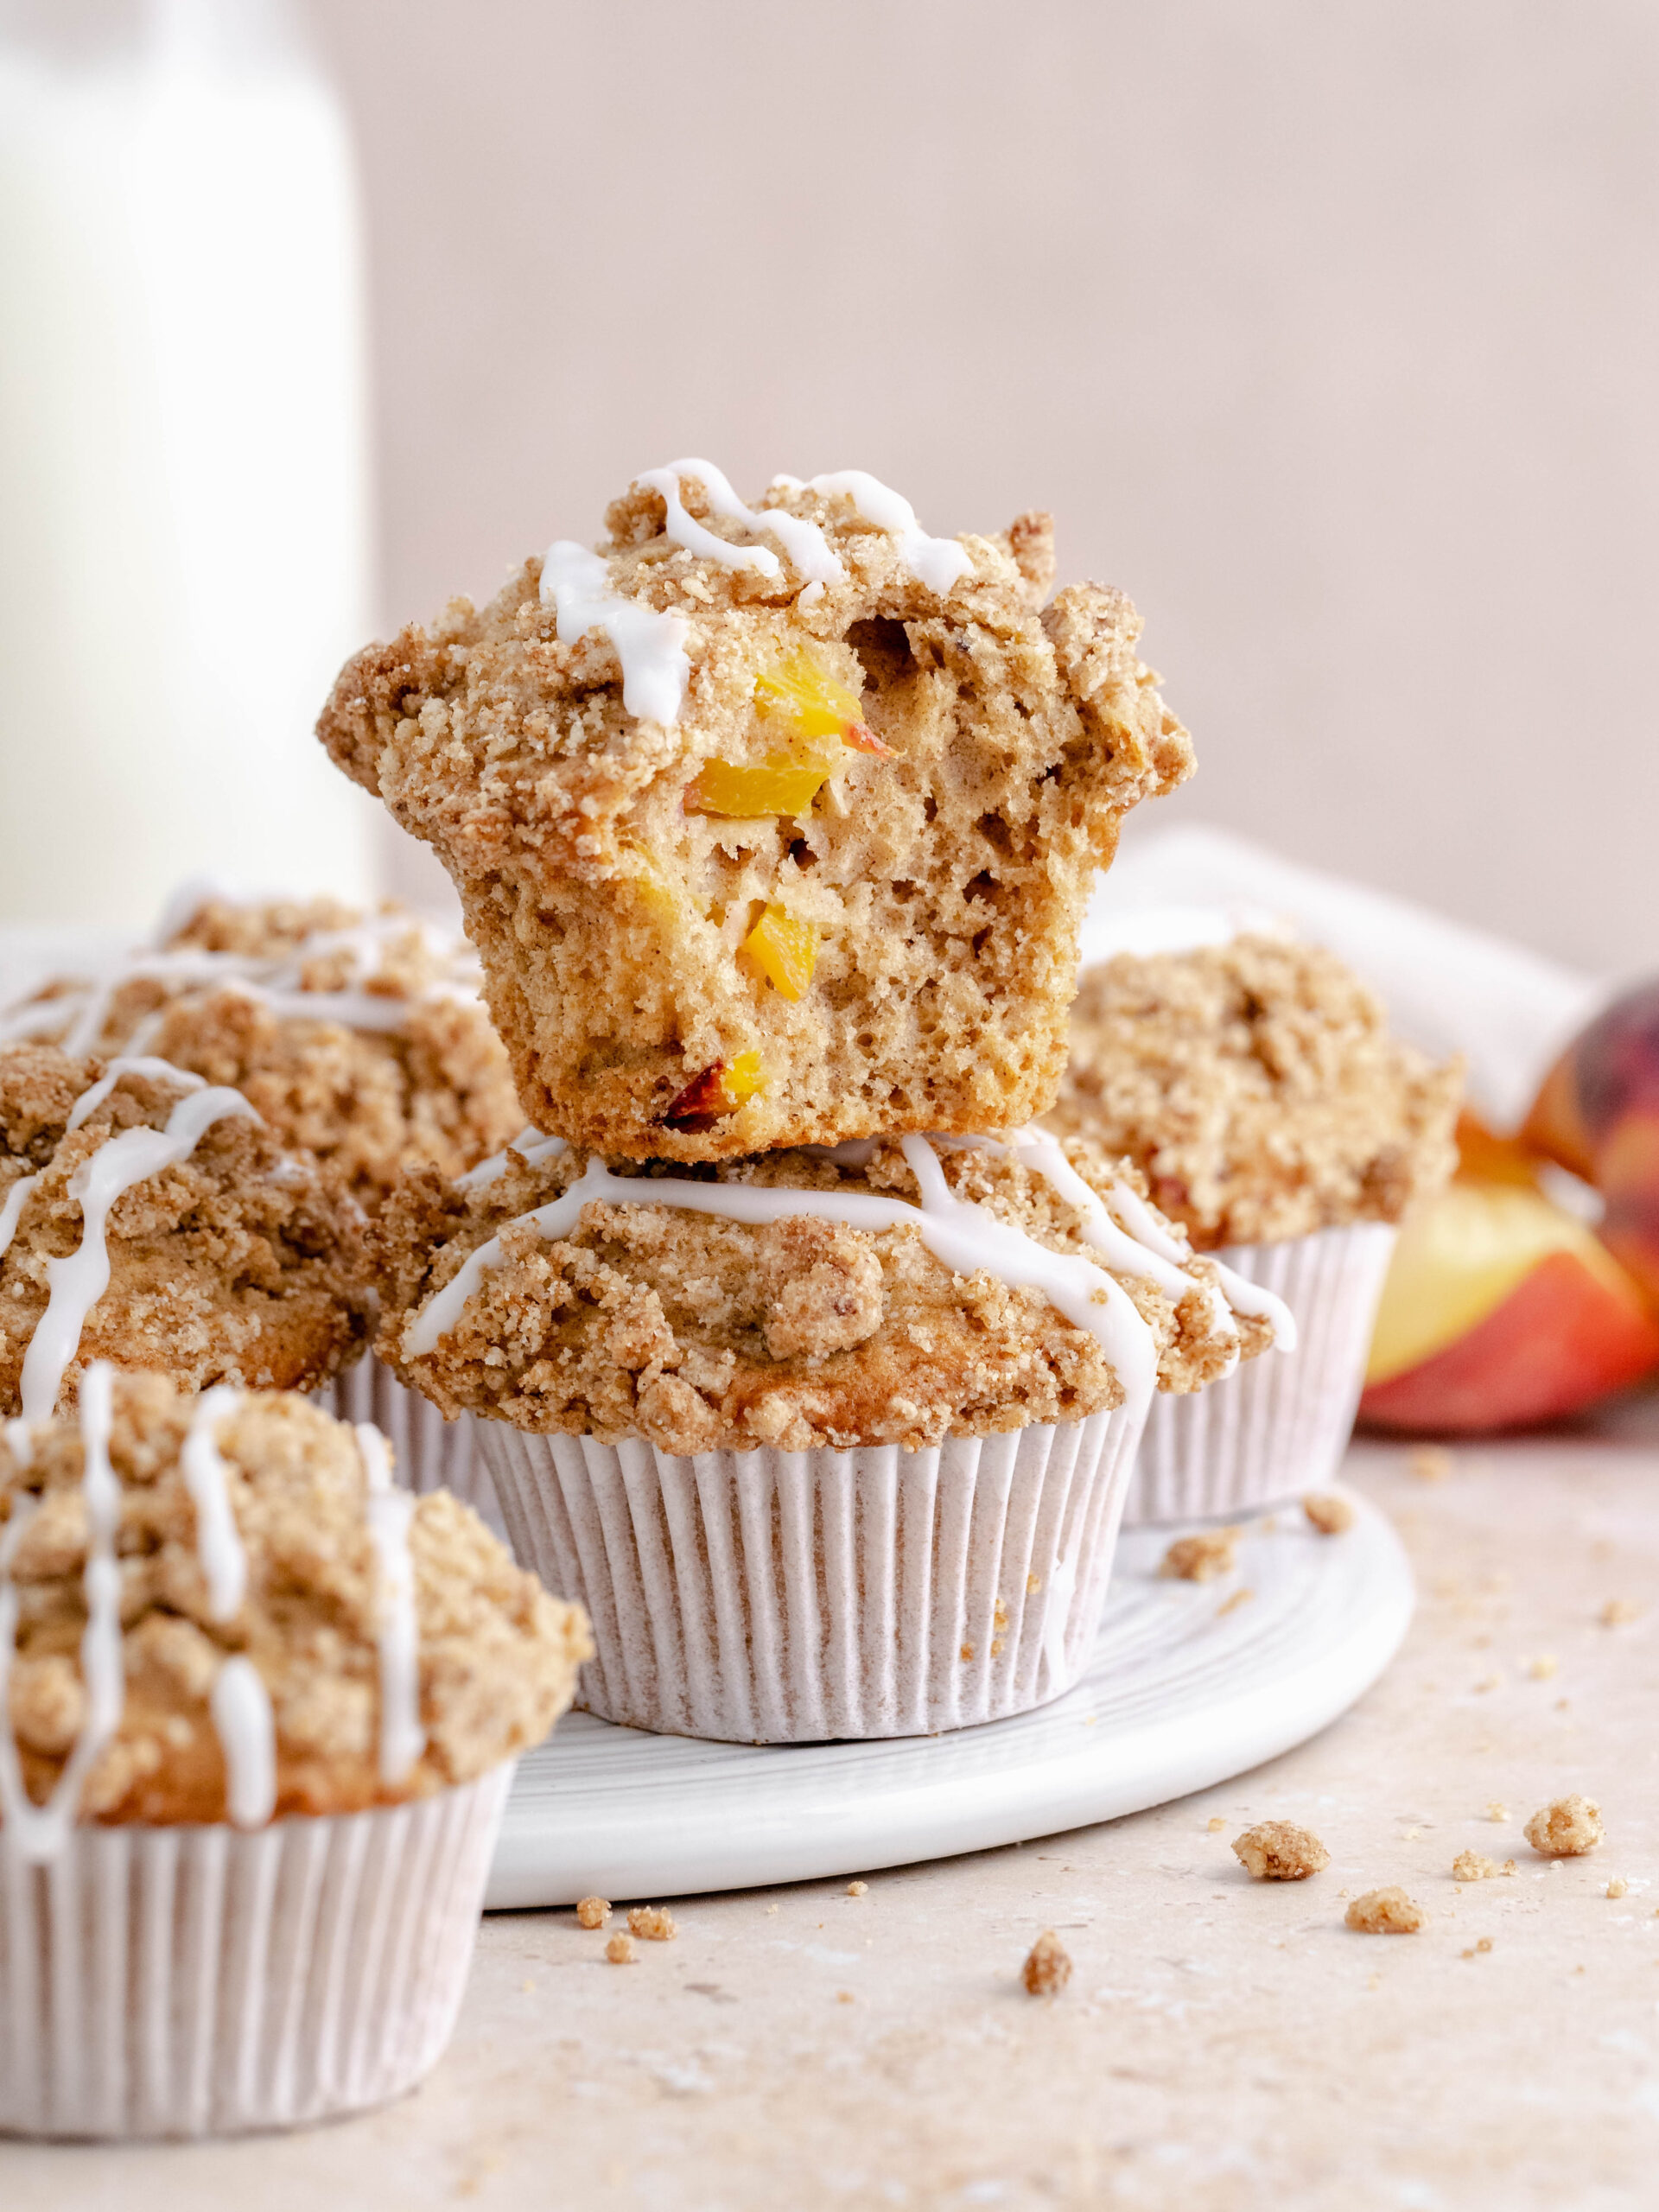 Peach crumble muffins stacked on a plate.